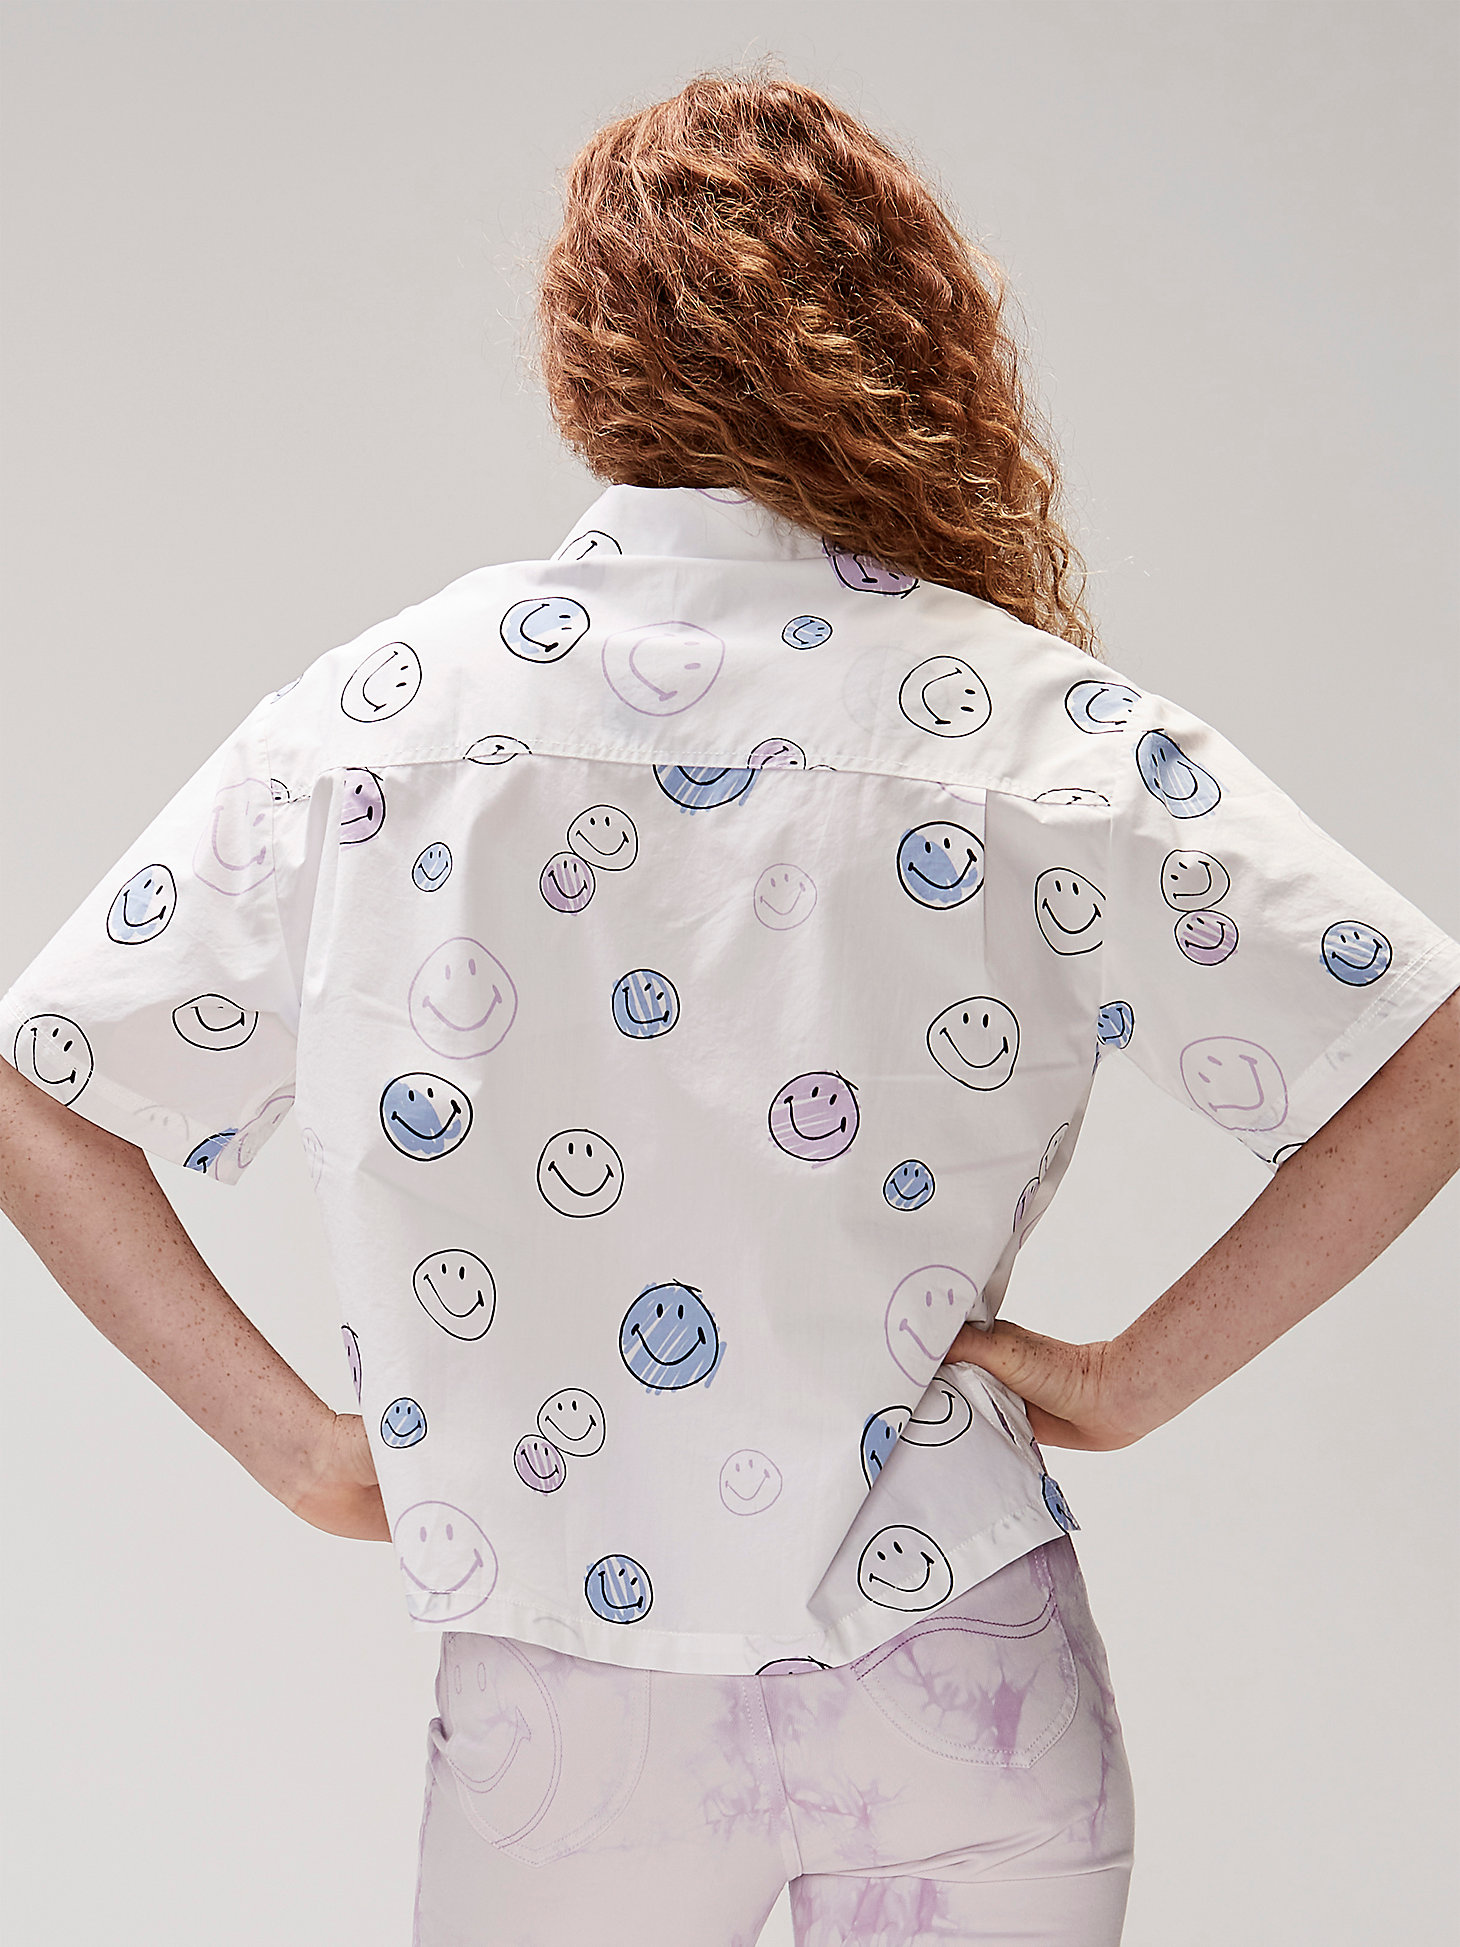 Women's Lee® x Smiley® Face Camp Shirt in White alternative view 2